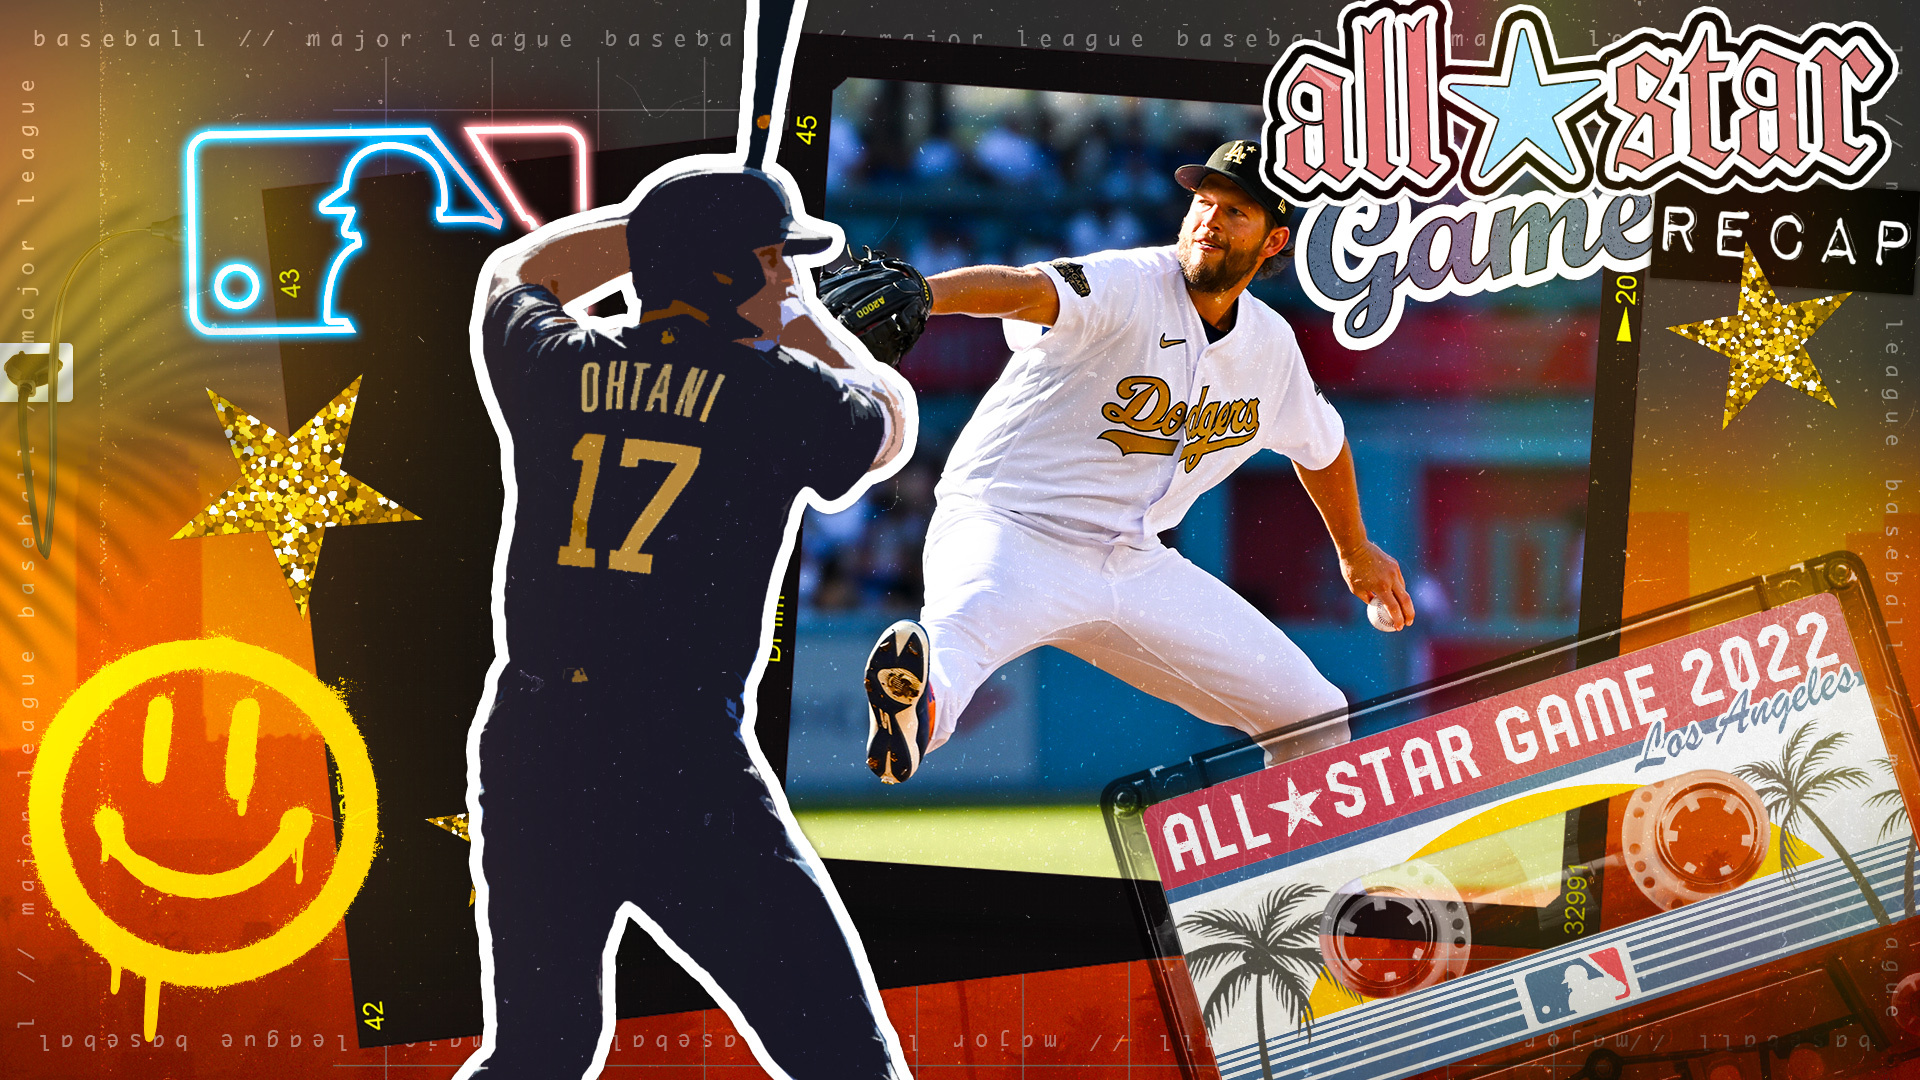 2022 MLB All-Star Game recap: American League wins ninth in a row